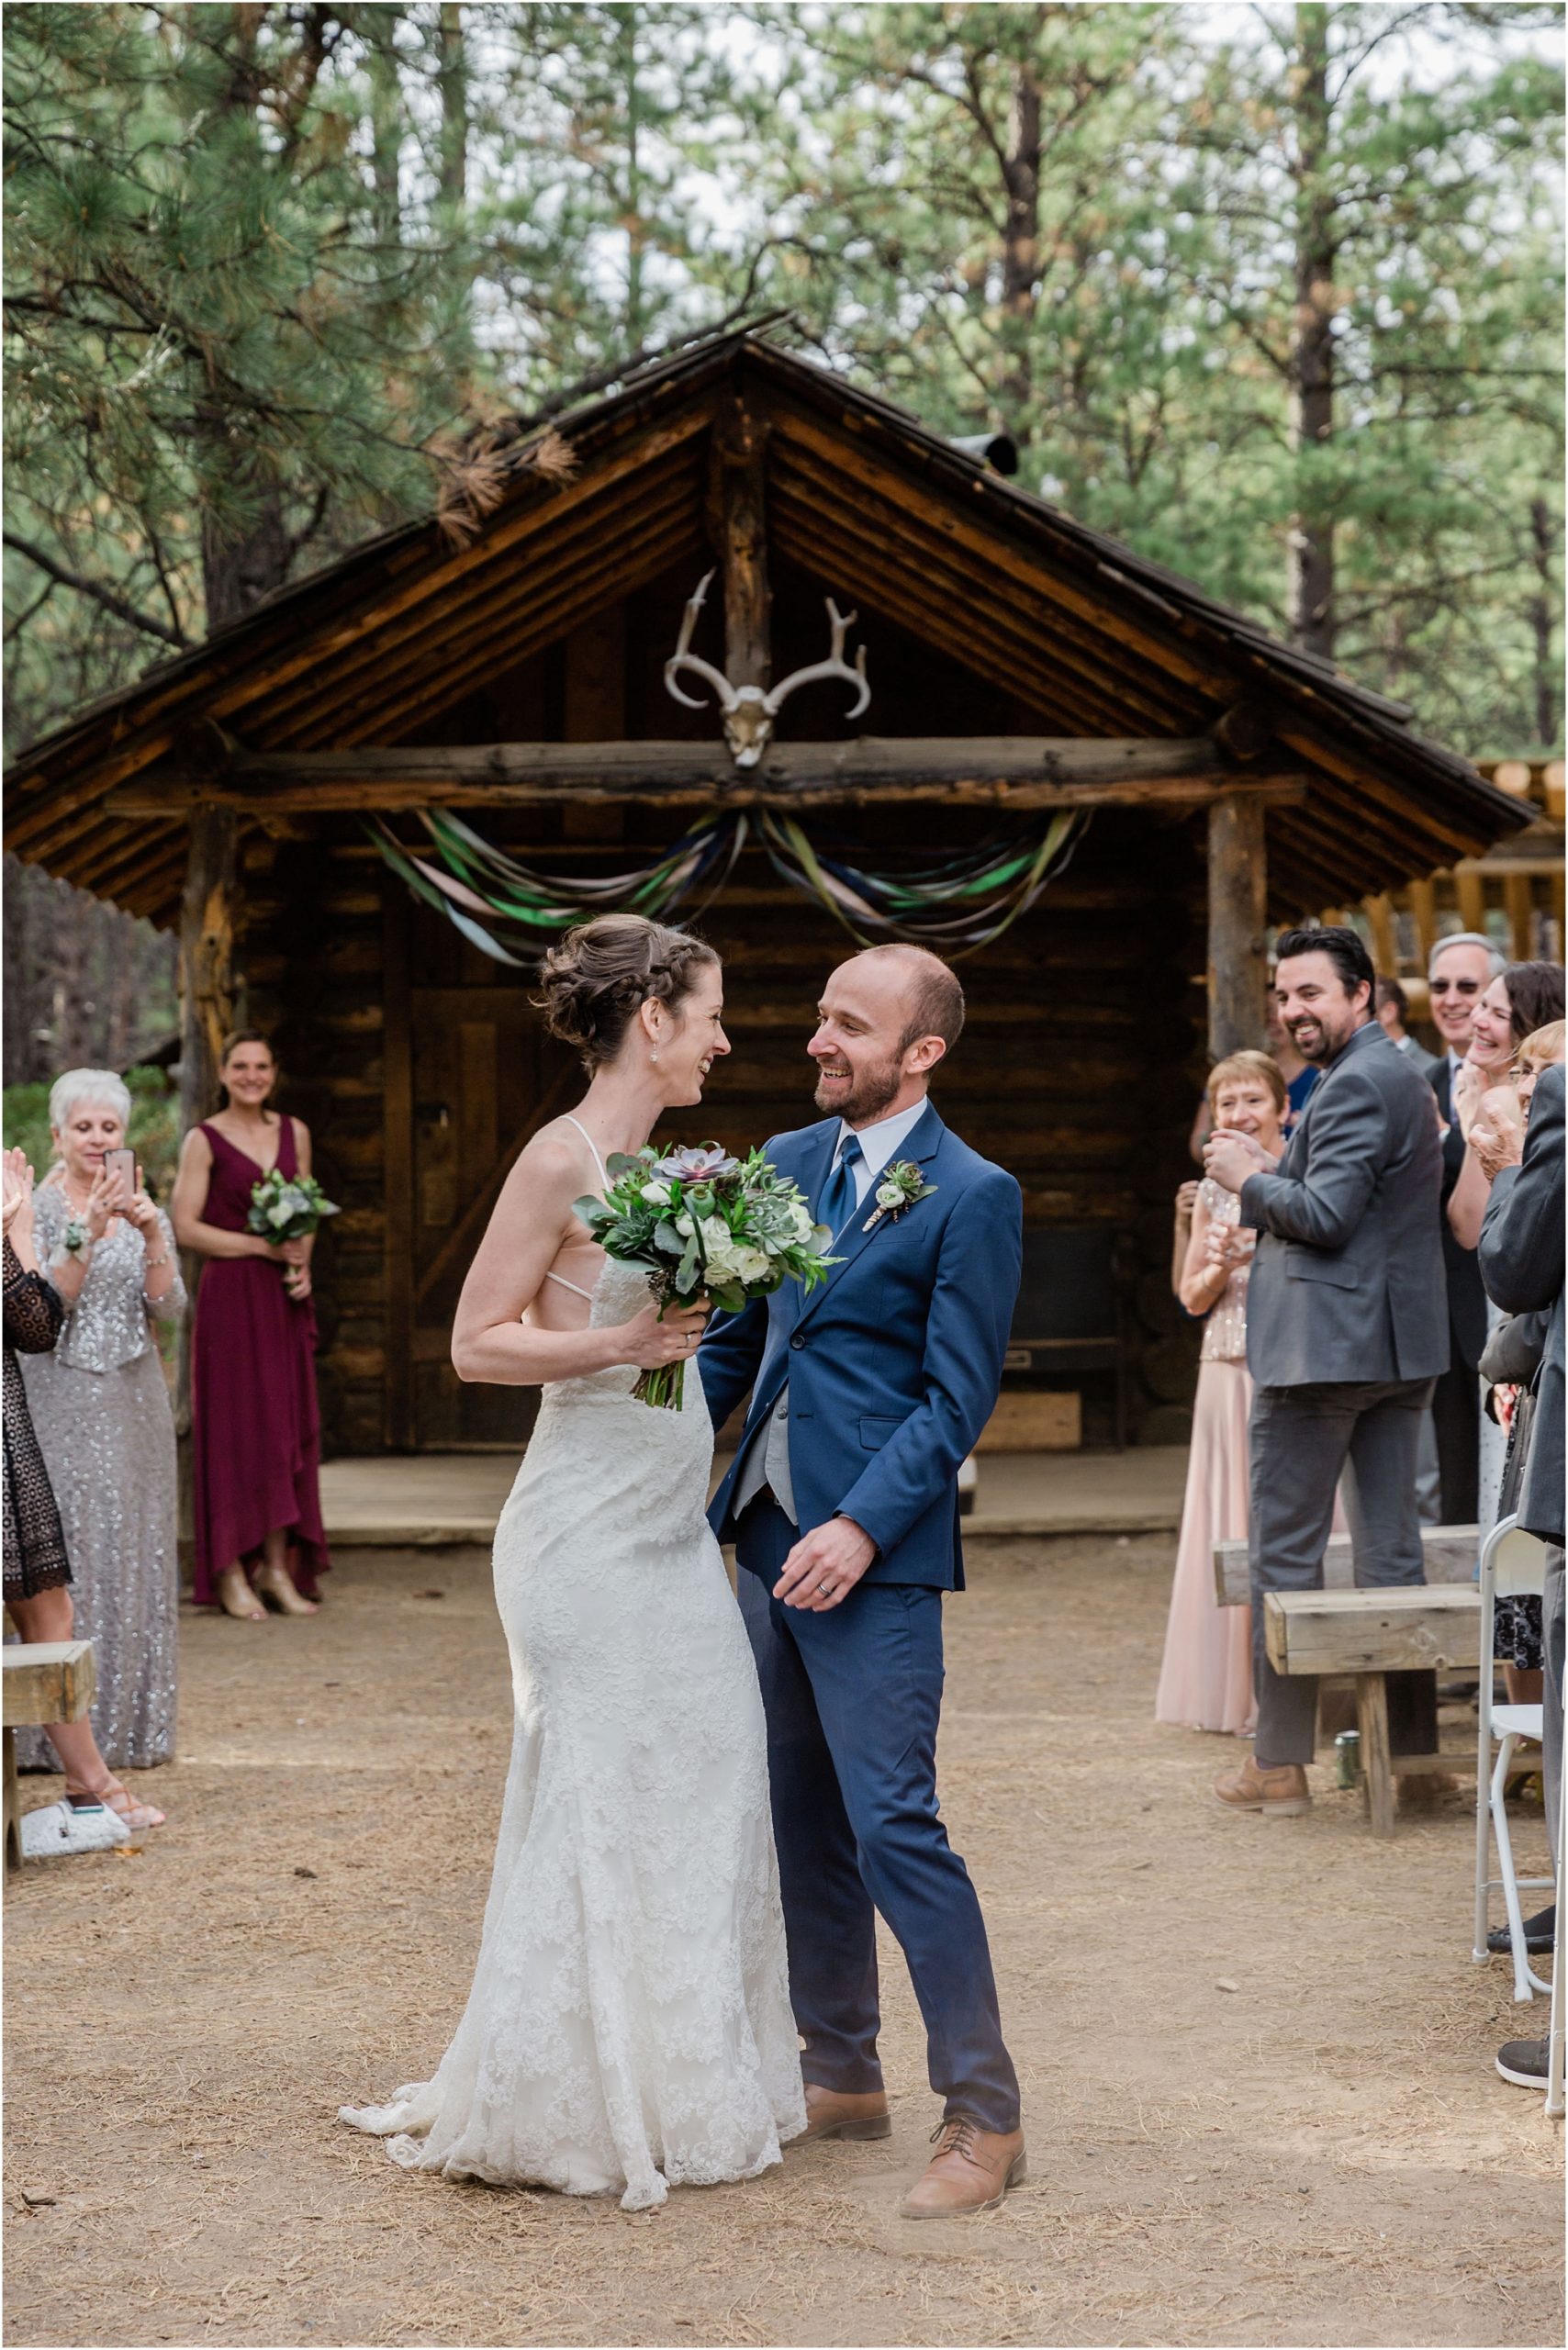 A celebration as the couple are officially pronounced husband and wife at the Miller Family Ranch in Bend, OR. | Erica Swantek Photography